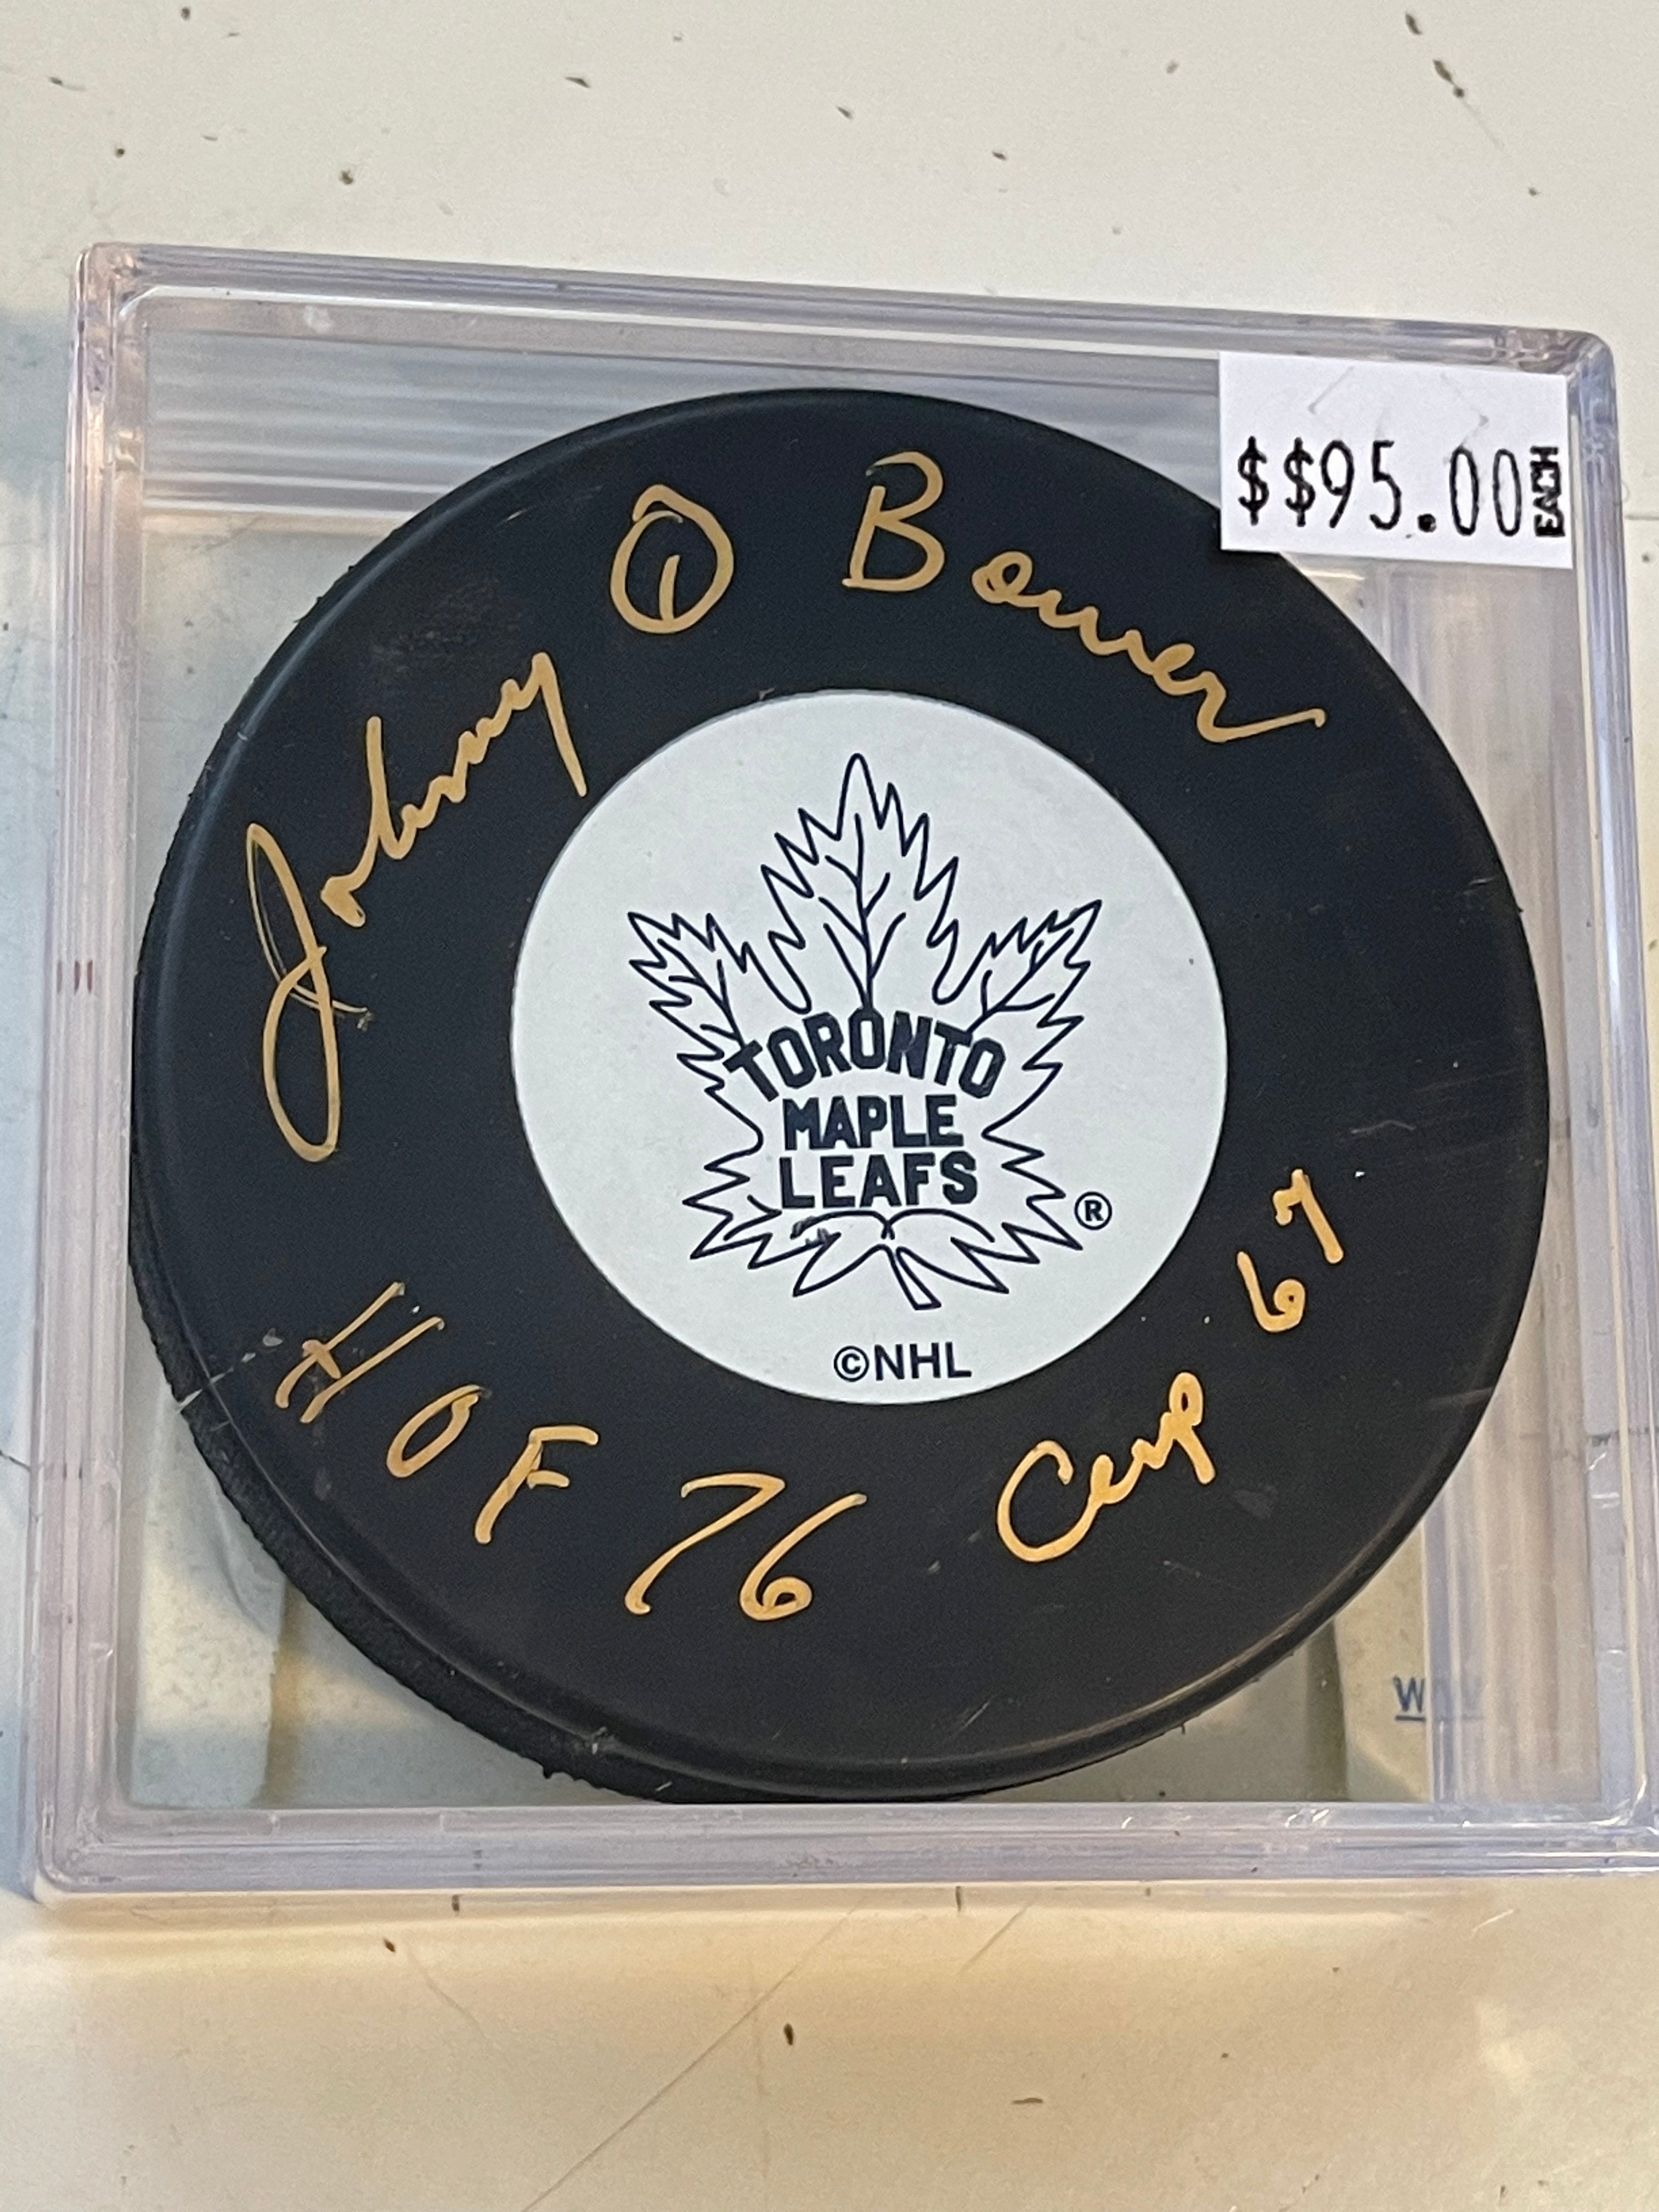 Johnny Bower Toronto Maple Leafs autograph inscription puck with COA